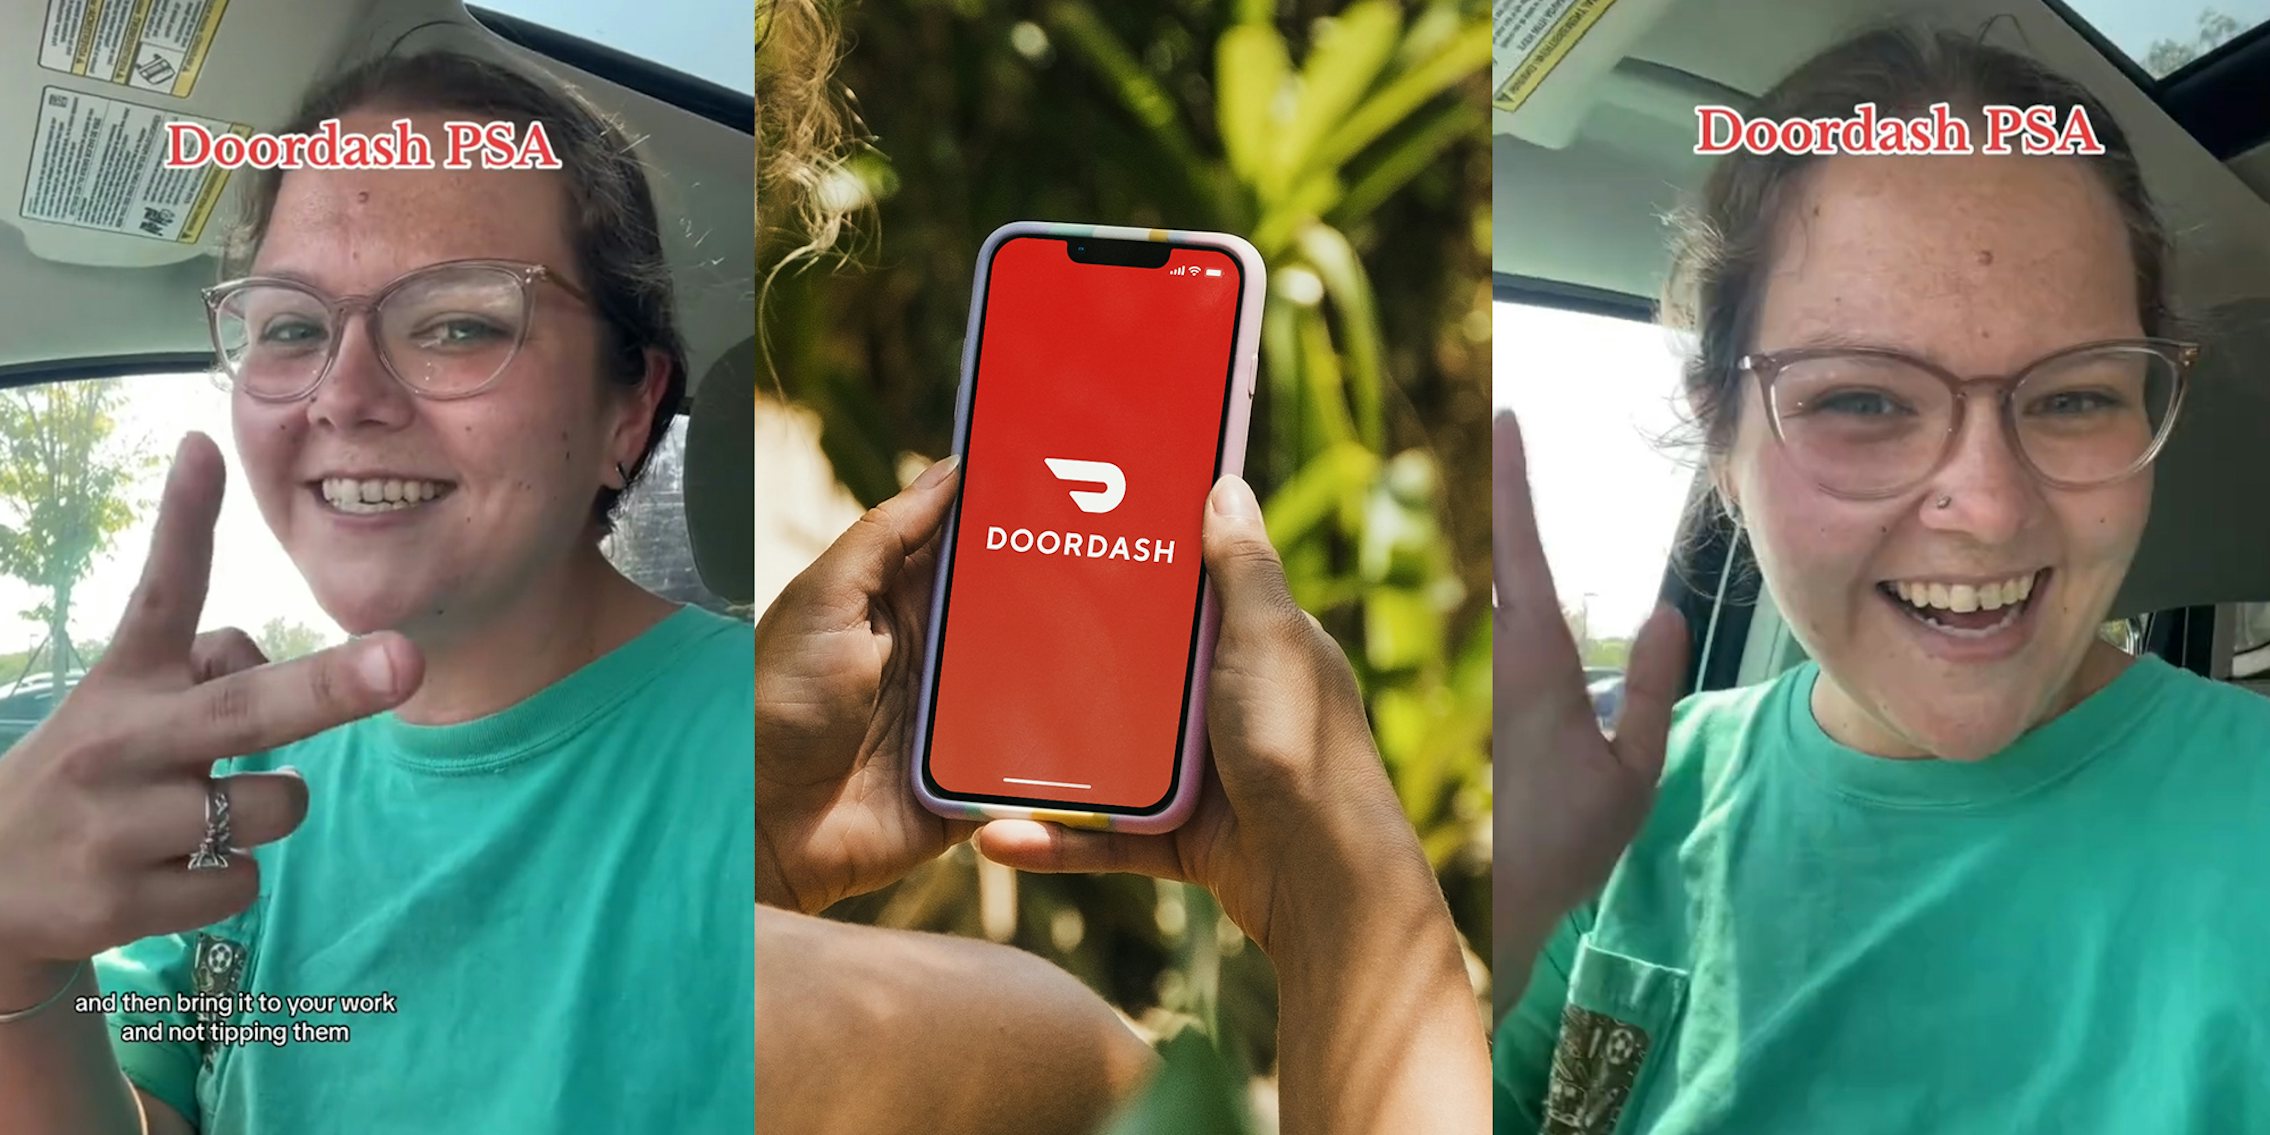 DoorDash driver says customer made her go to 2 different restaurants to pick up orders. She got no tip